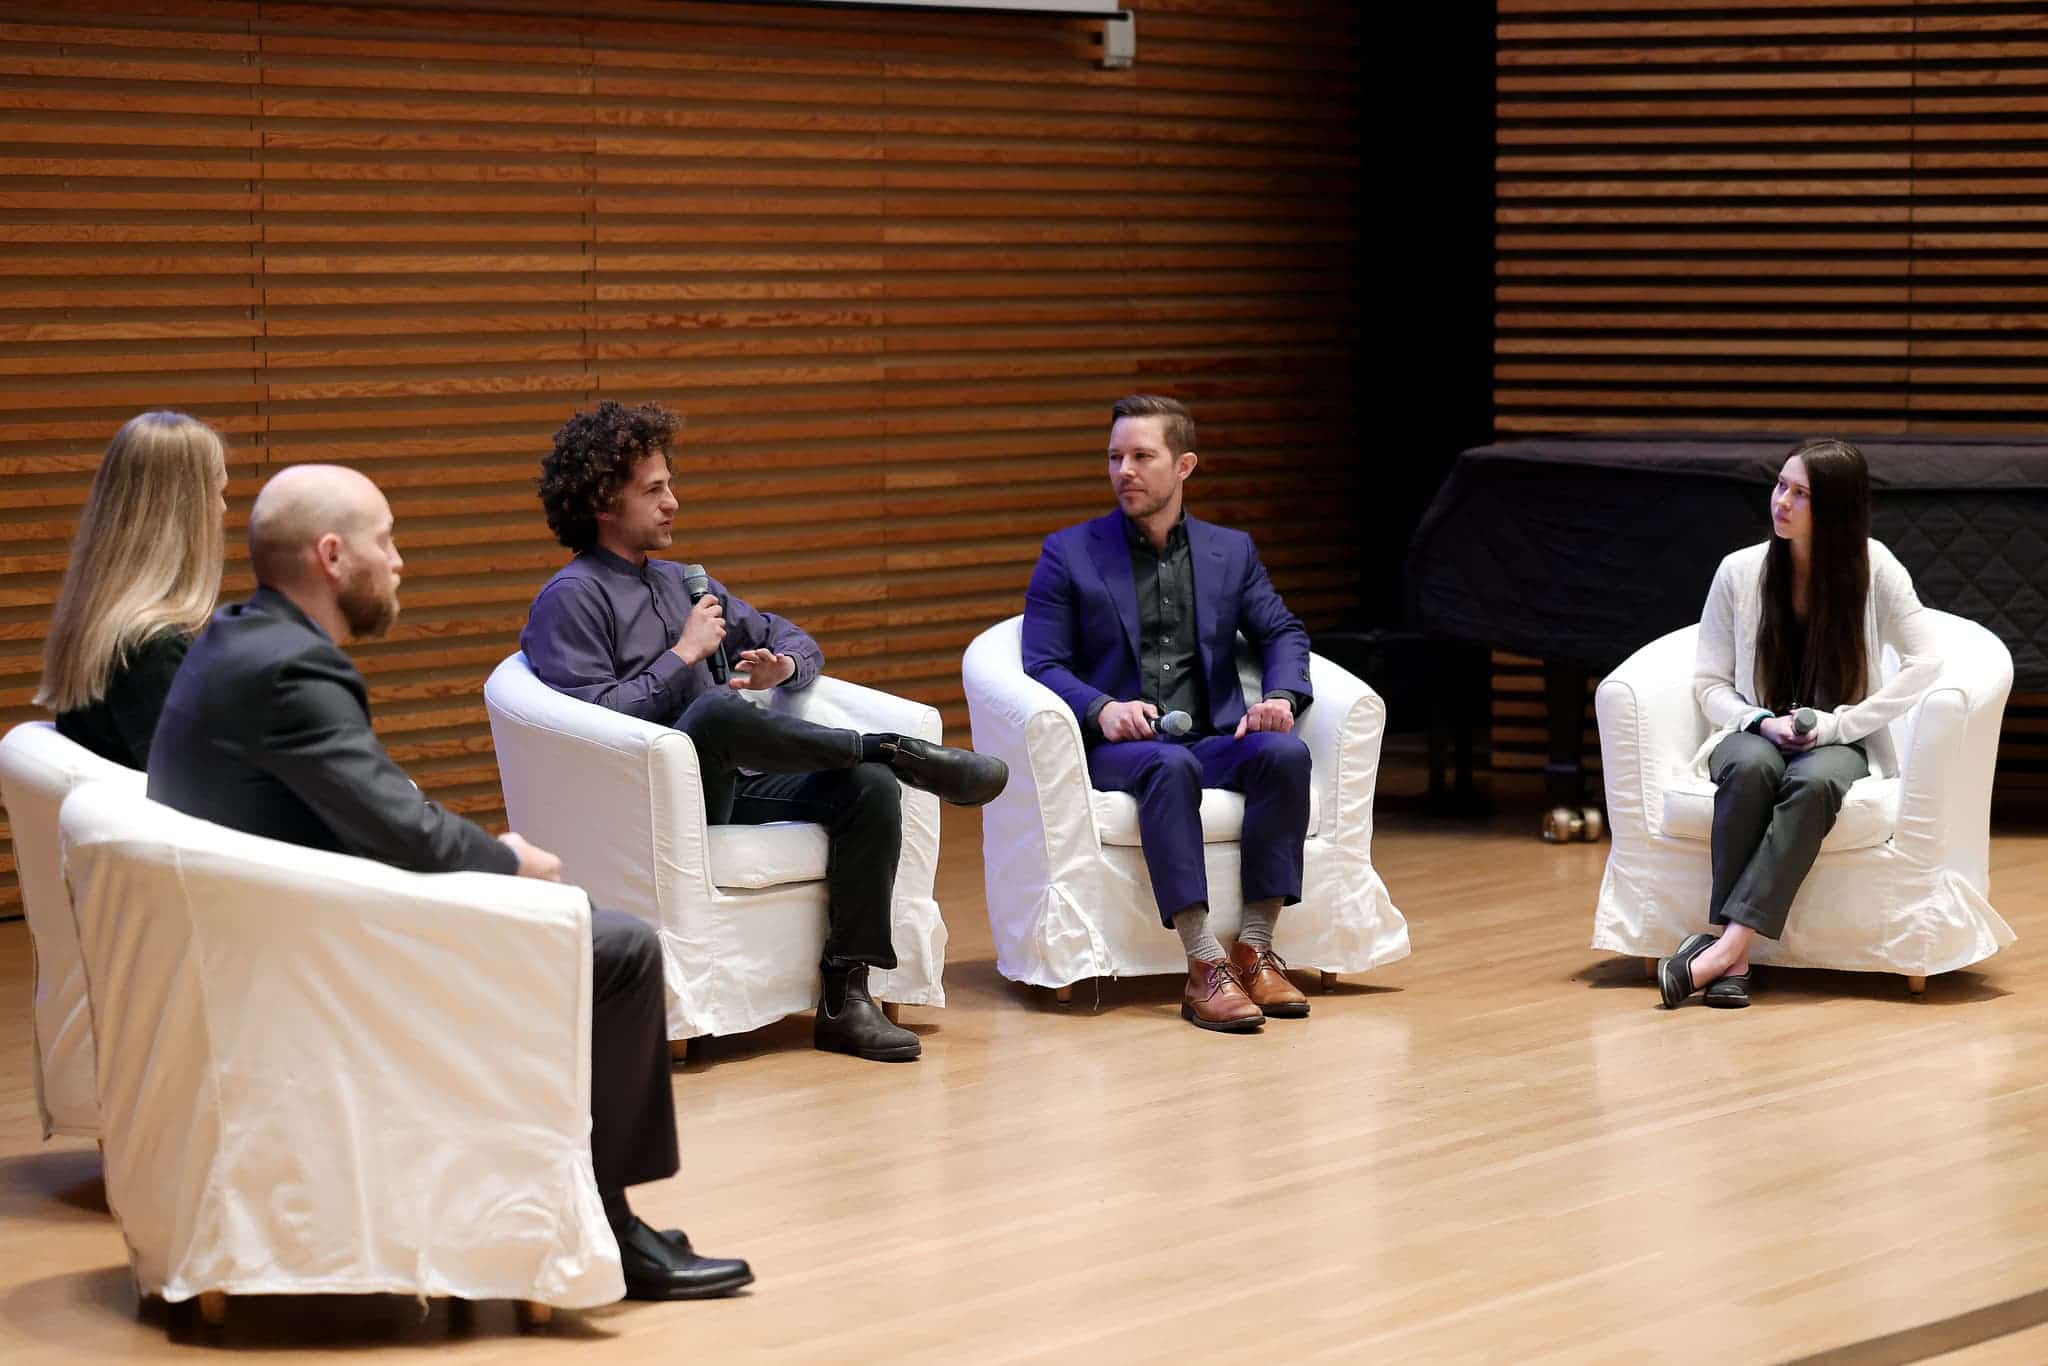 five people sitting on a stage having a discussion